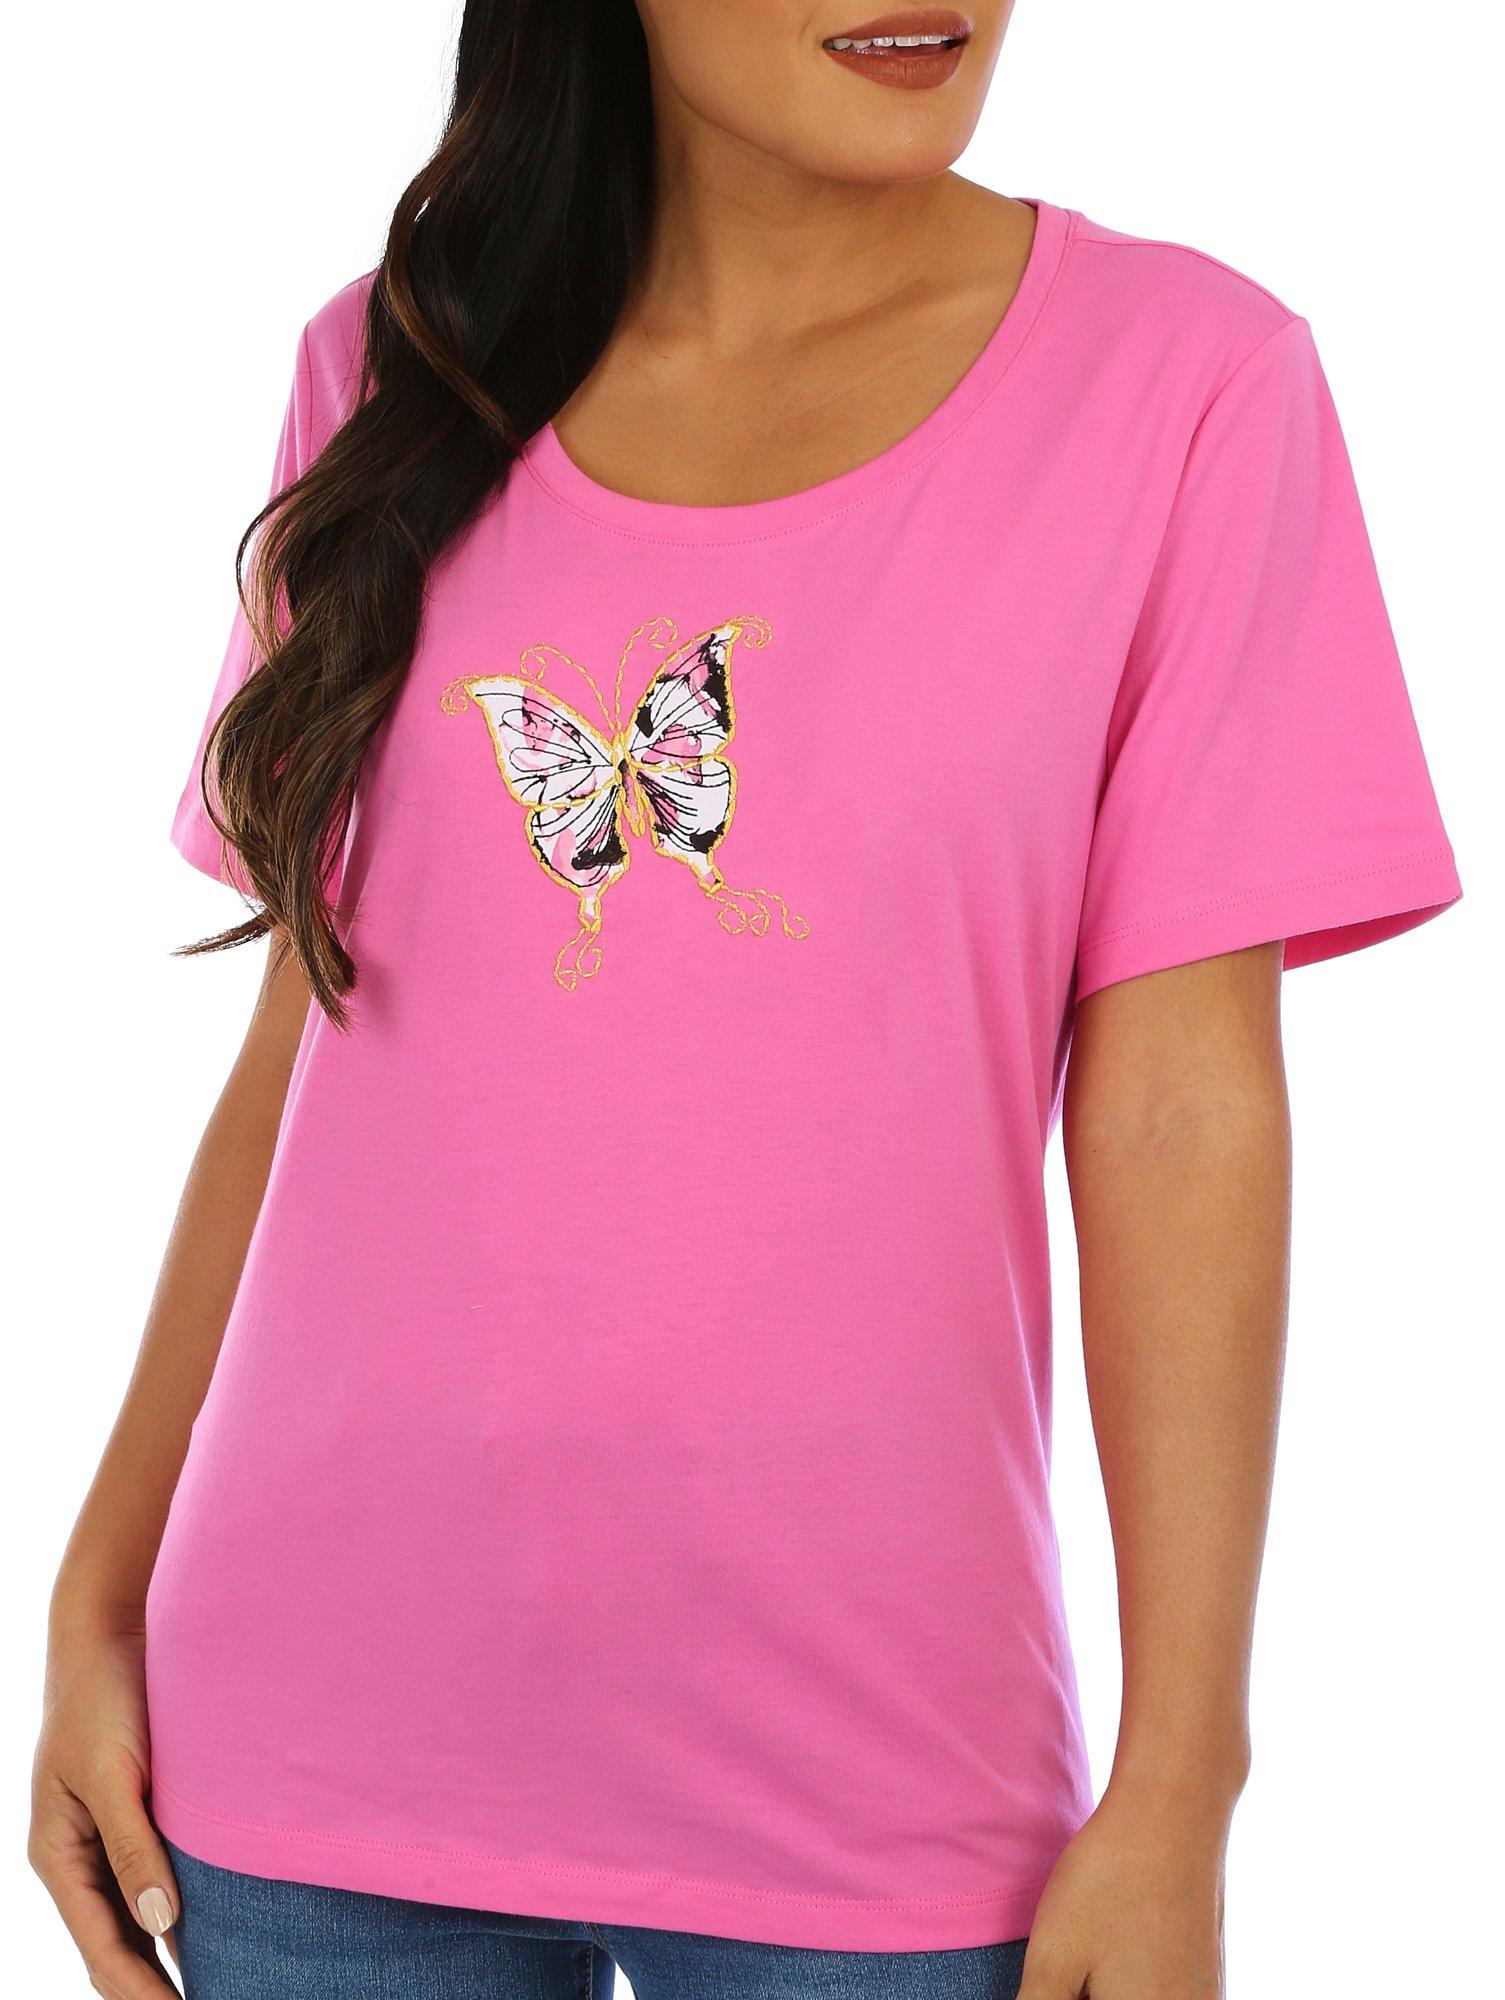 Coral Bay Womens Scoop Butterfly Short Sleeve Tee